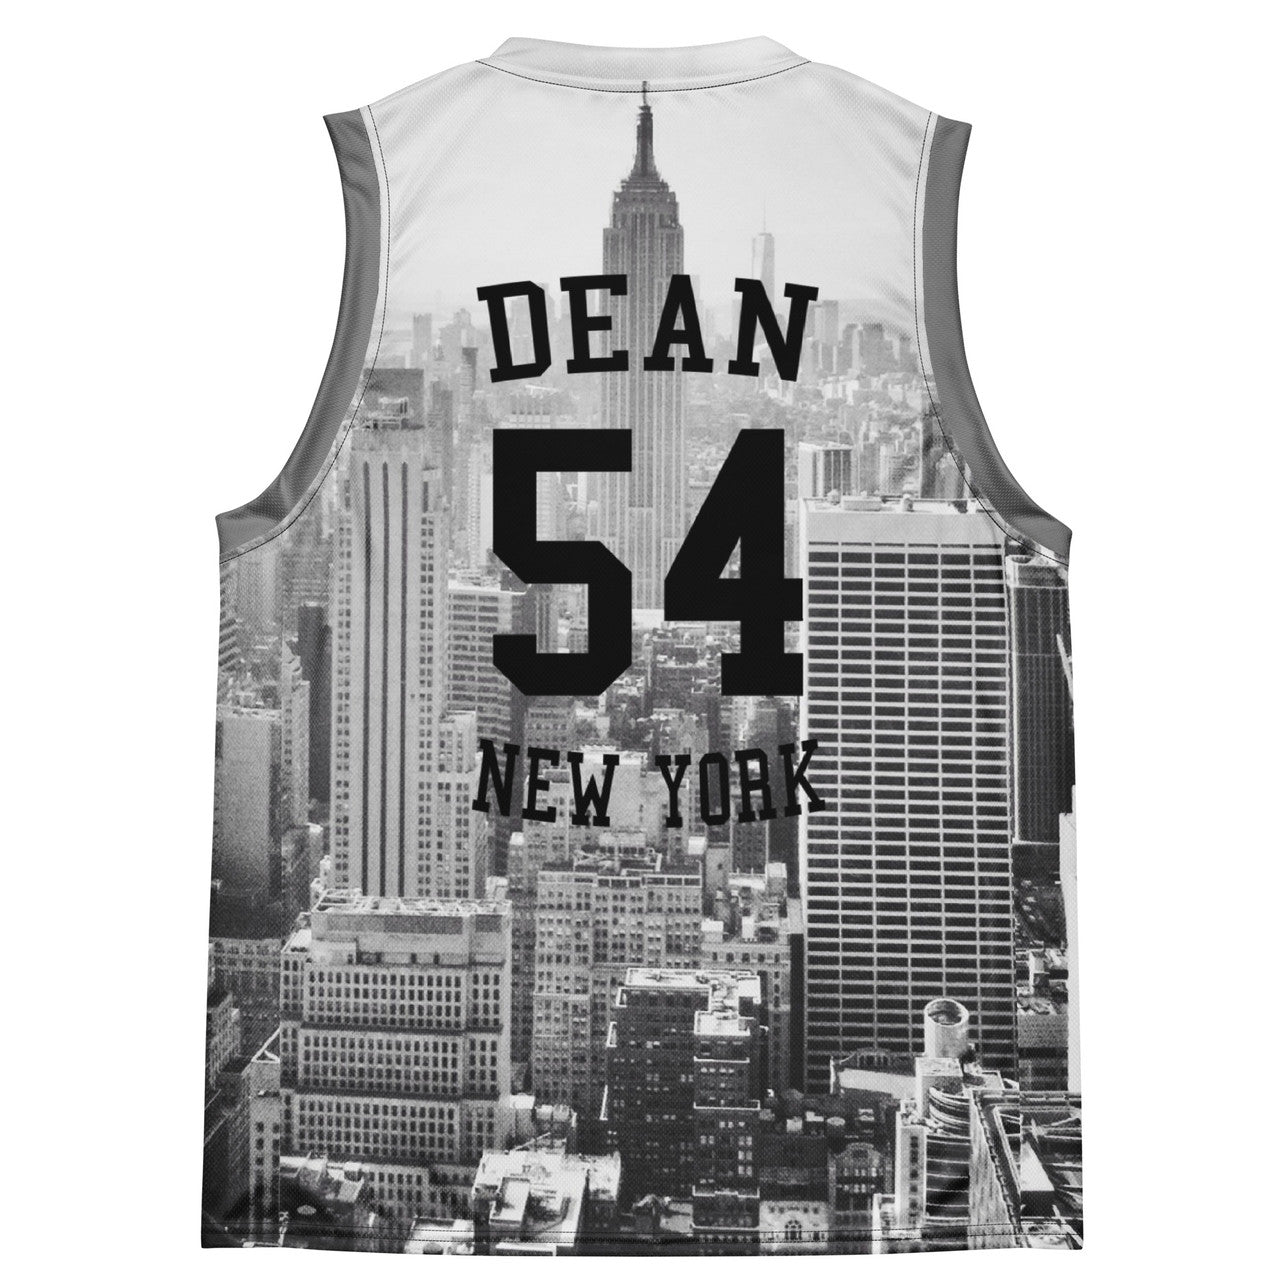 James Dean 1954 Recycled unisex basketball jersey - Hollywood Icon - New York Times Square